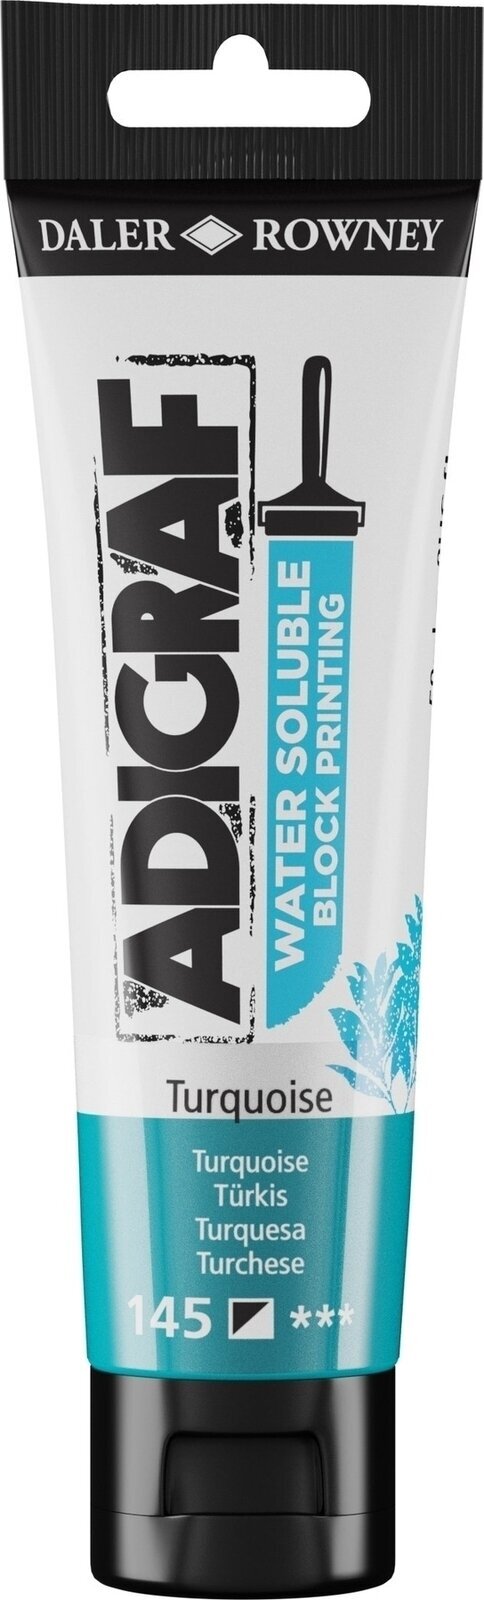 Paint For Linocut Daler Rowney Adigraf Block Printing Water Soluble Colour Paint For Linocut Turquoise 59 ml